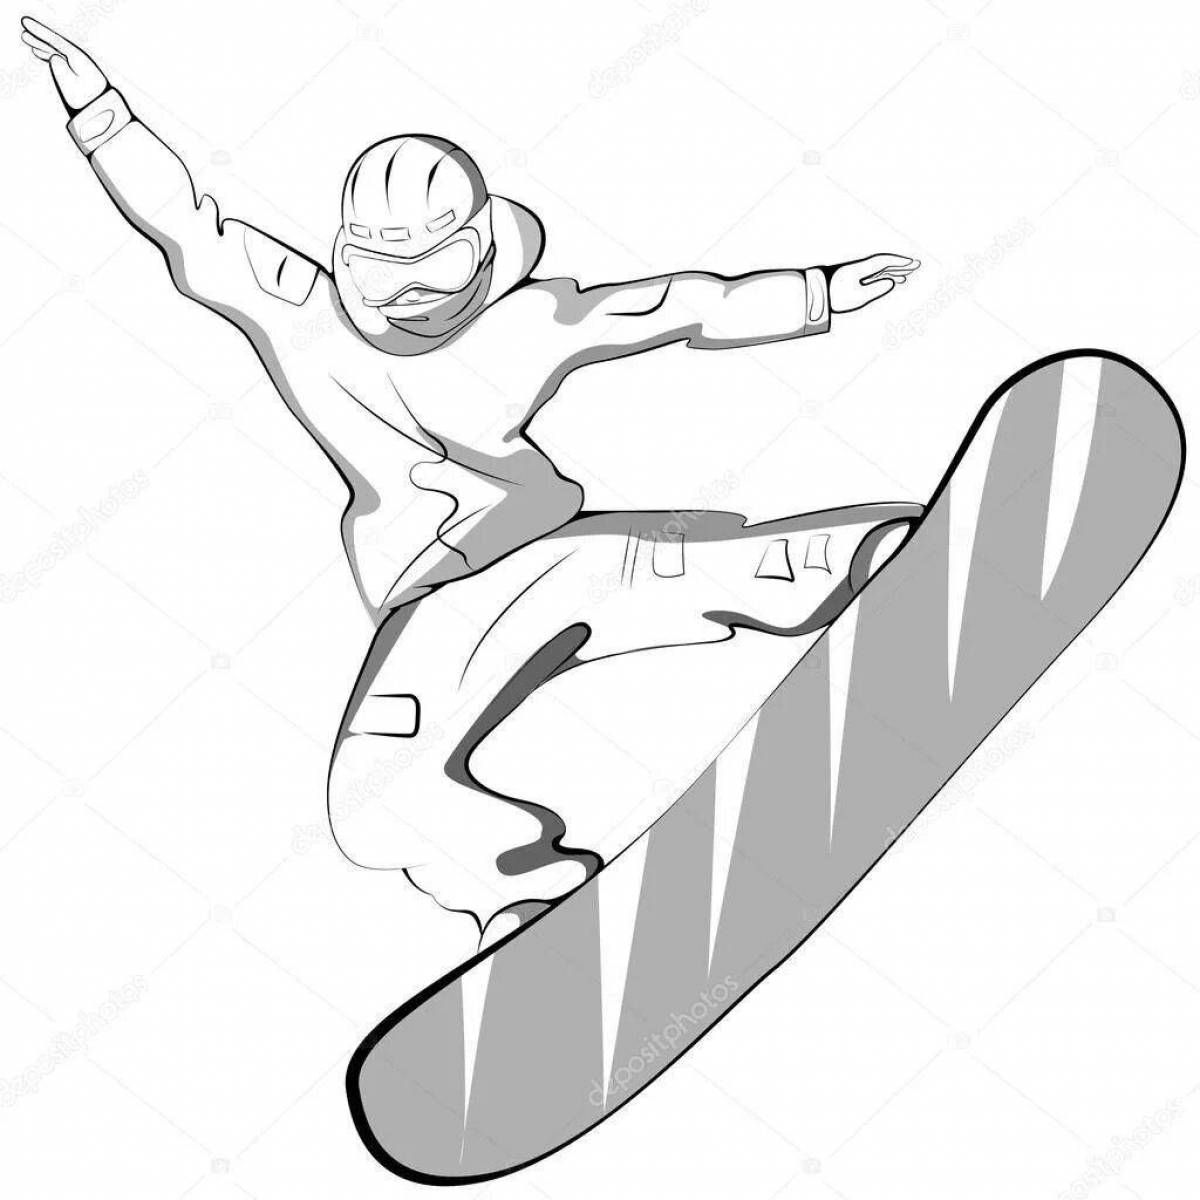 Awesome snowboard coloring page for kids